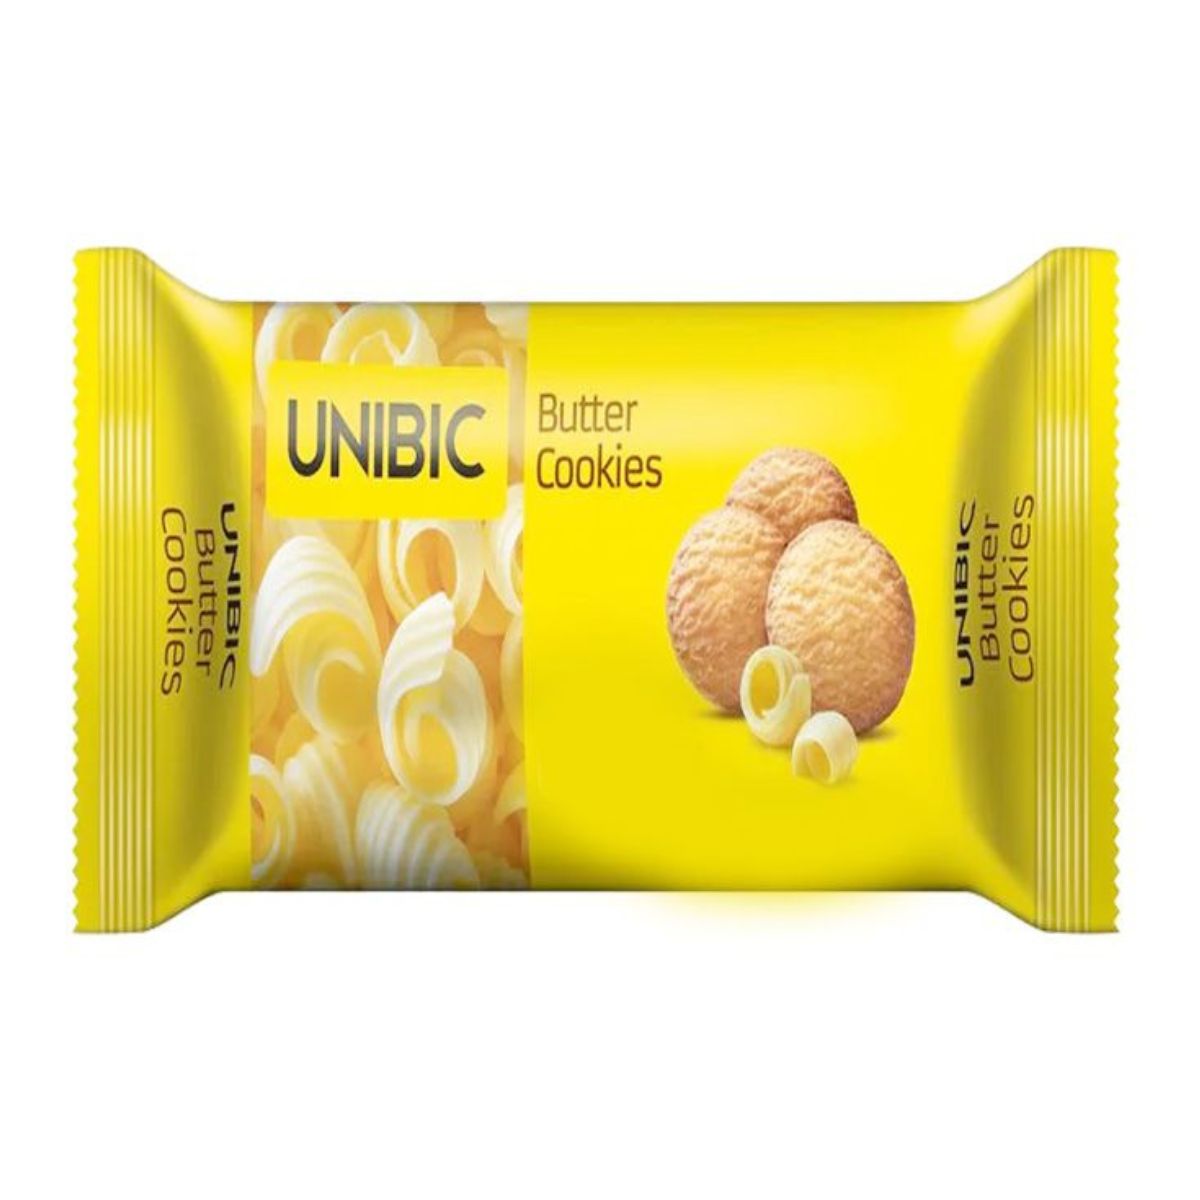 Unibic - Butter Cookies - 150g